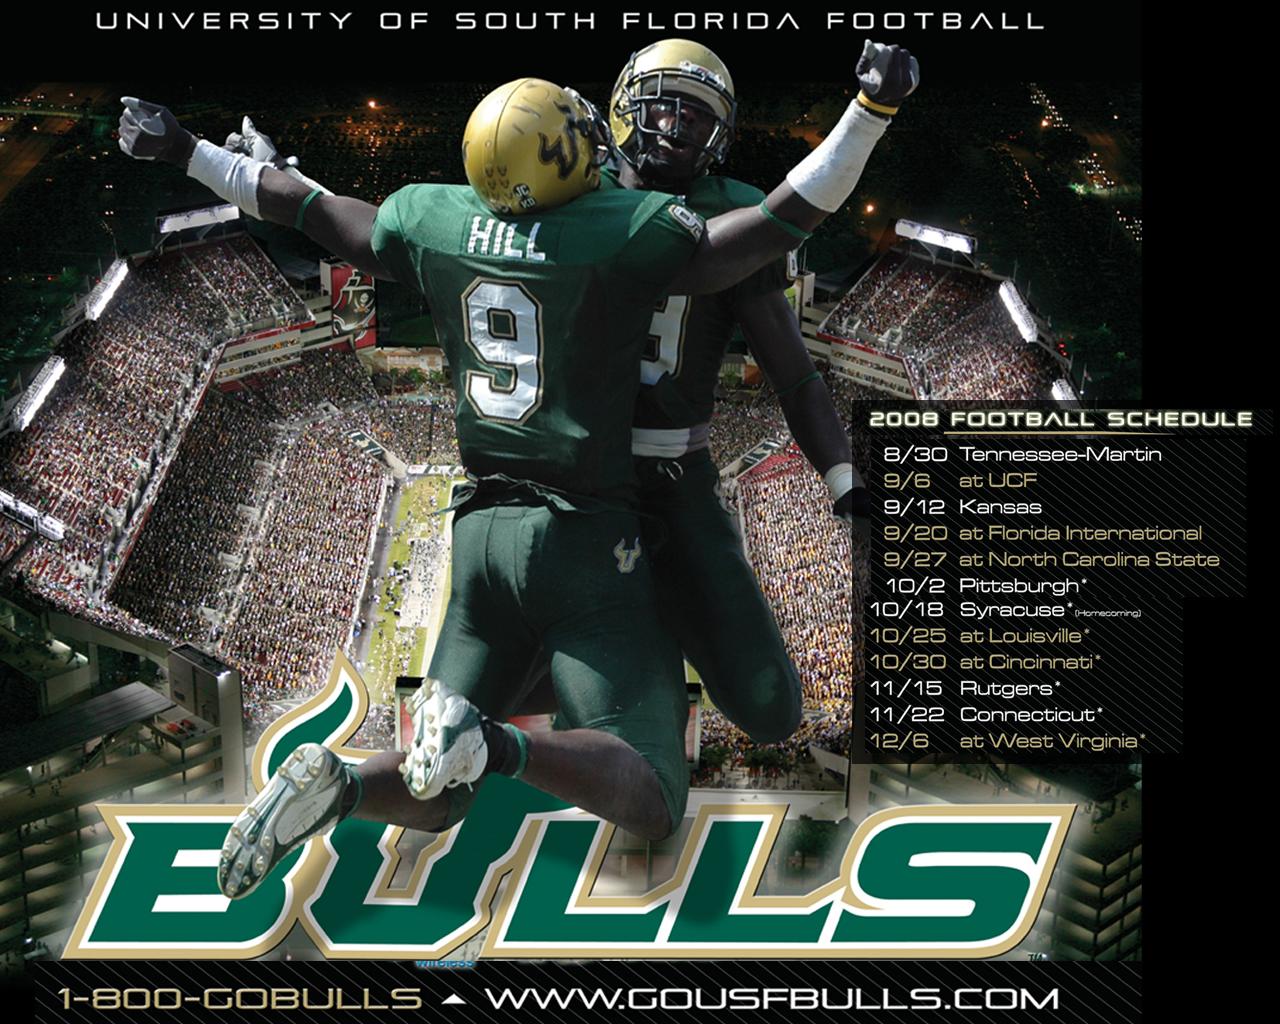  comOfficial Athletics Web Site of the University of South Florida